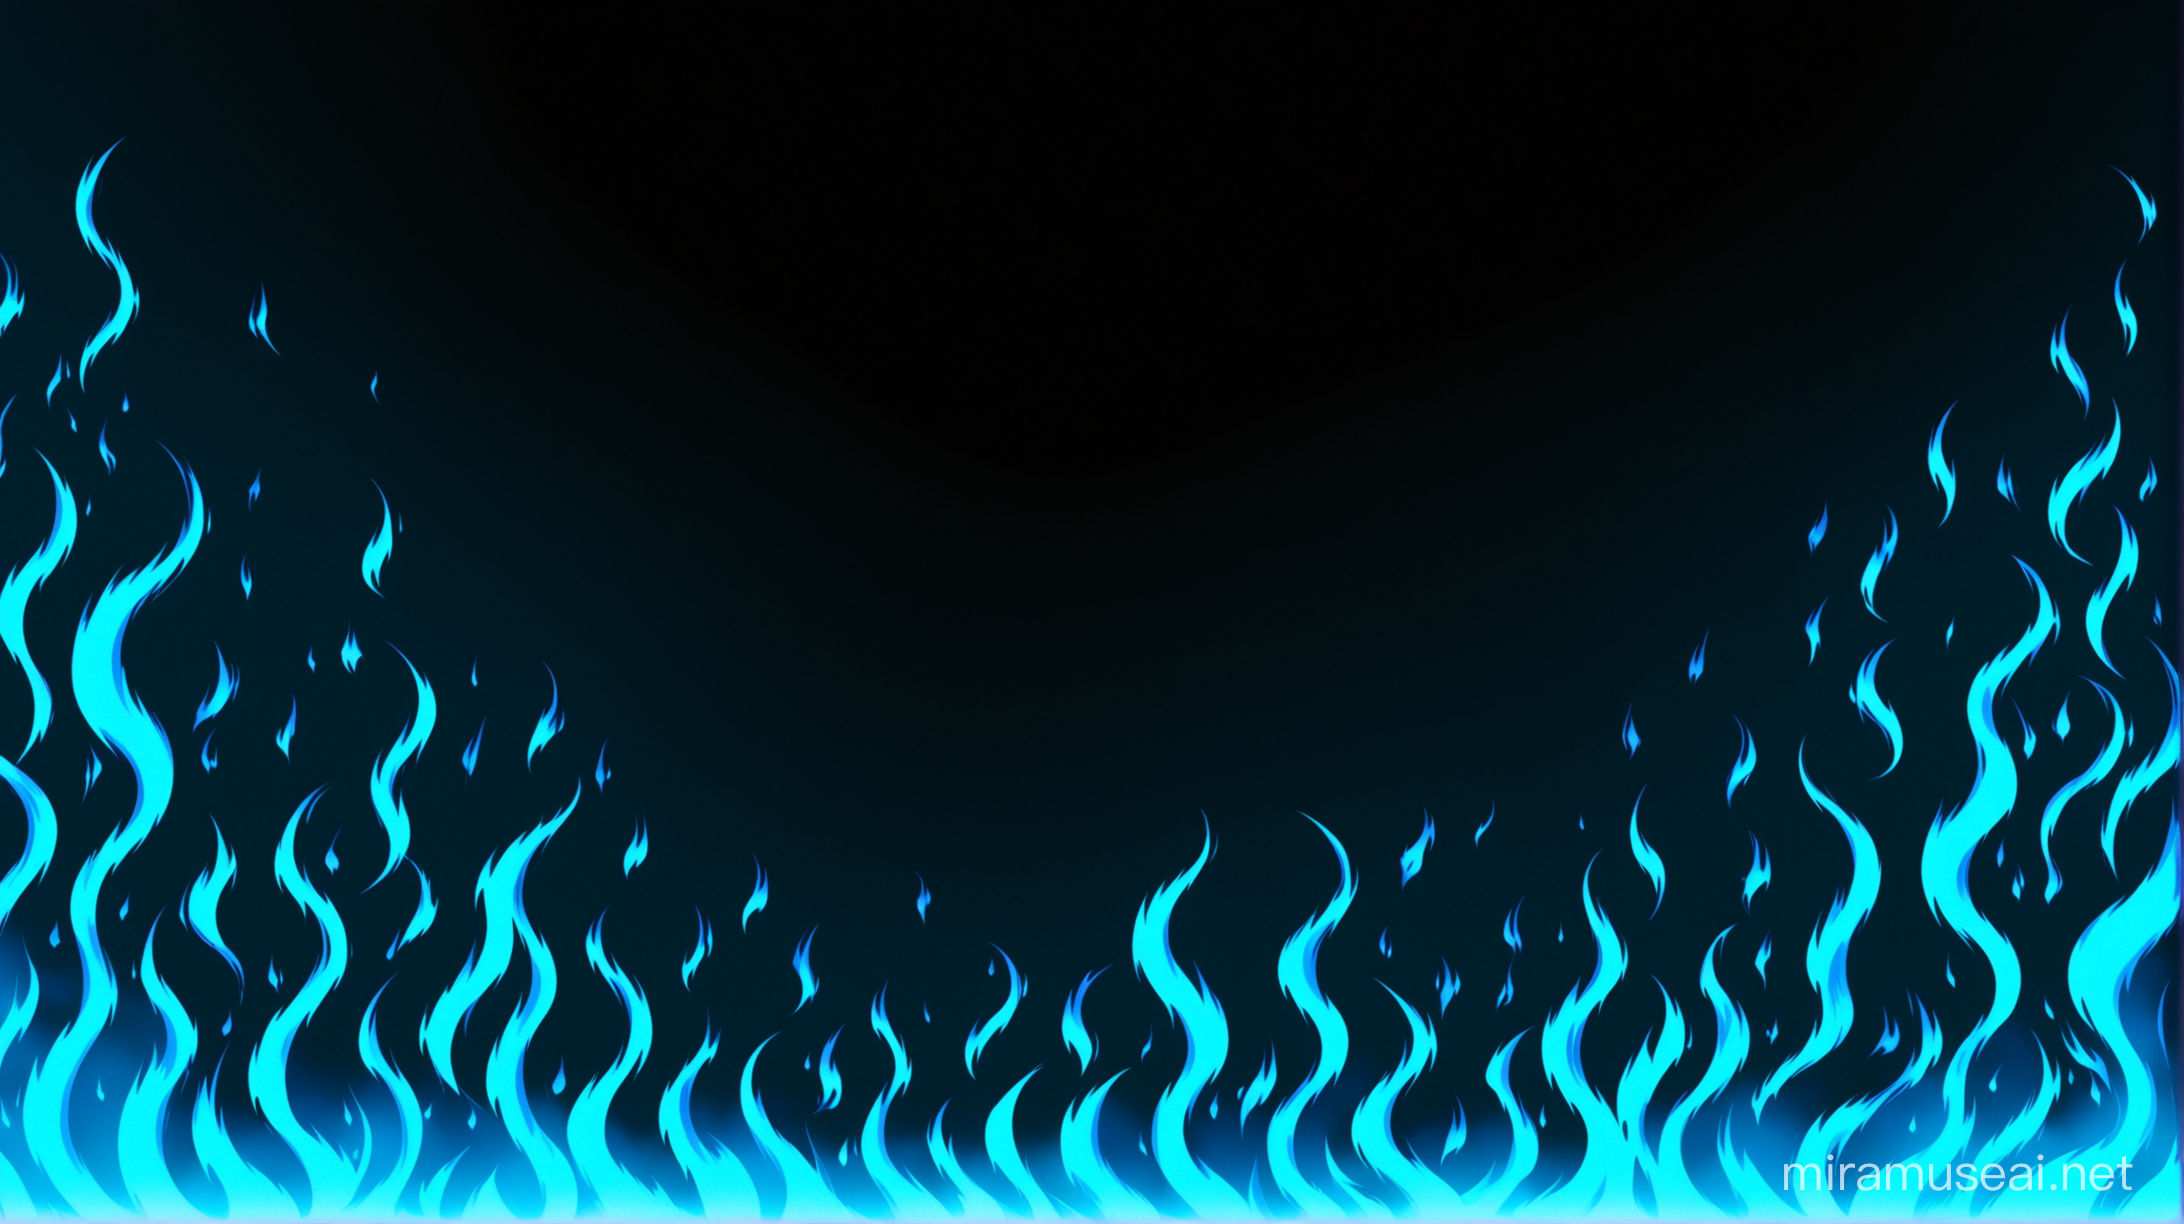 Create a vector style background that is black and has a subtle pattern of blue flames. Should have a clean, illustrated look